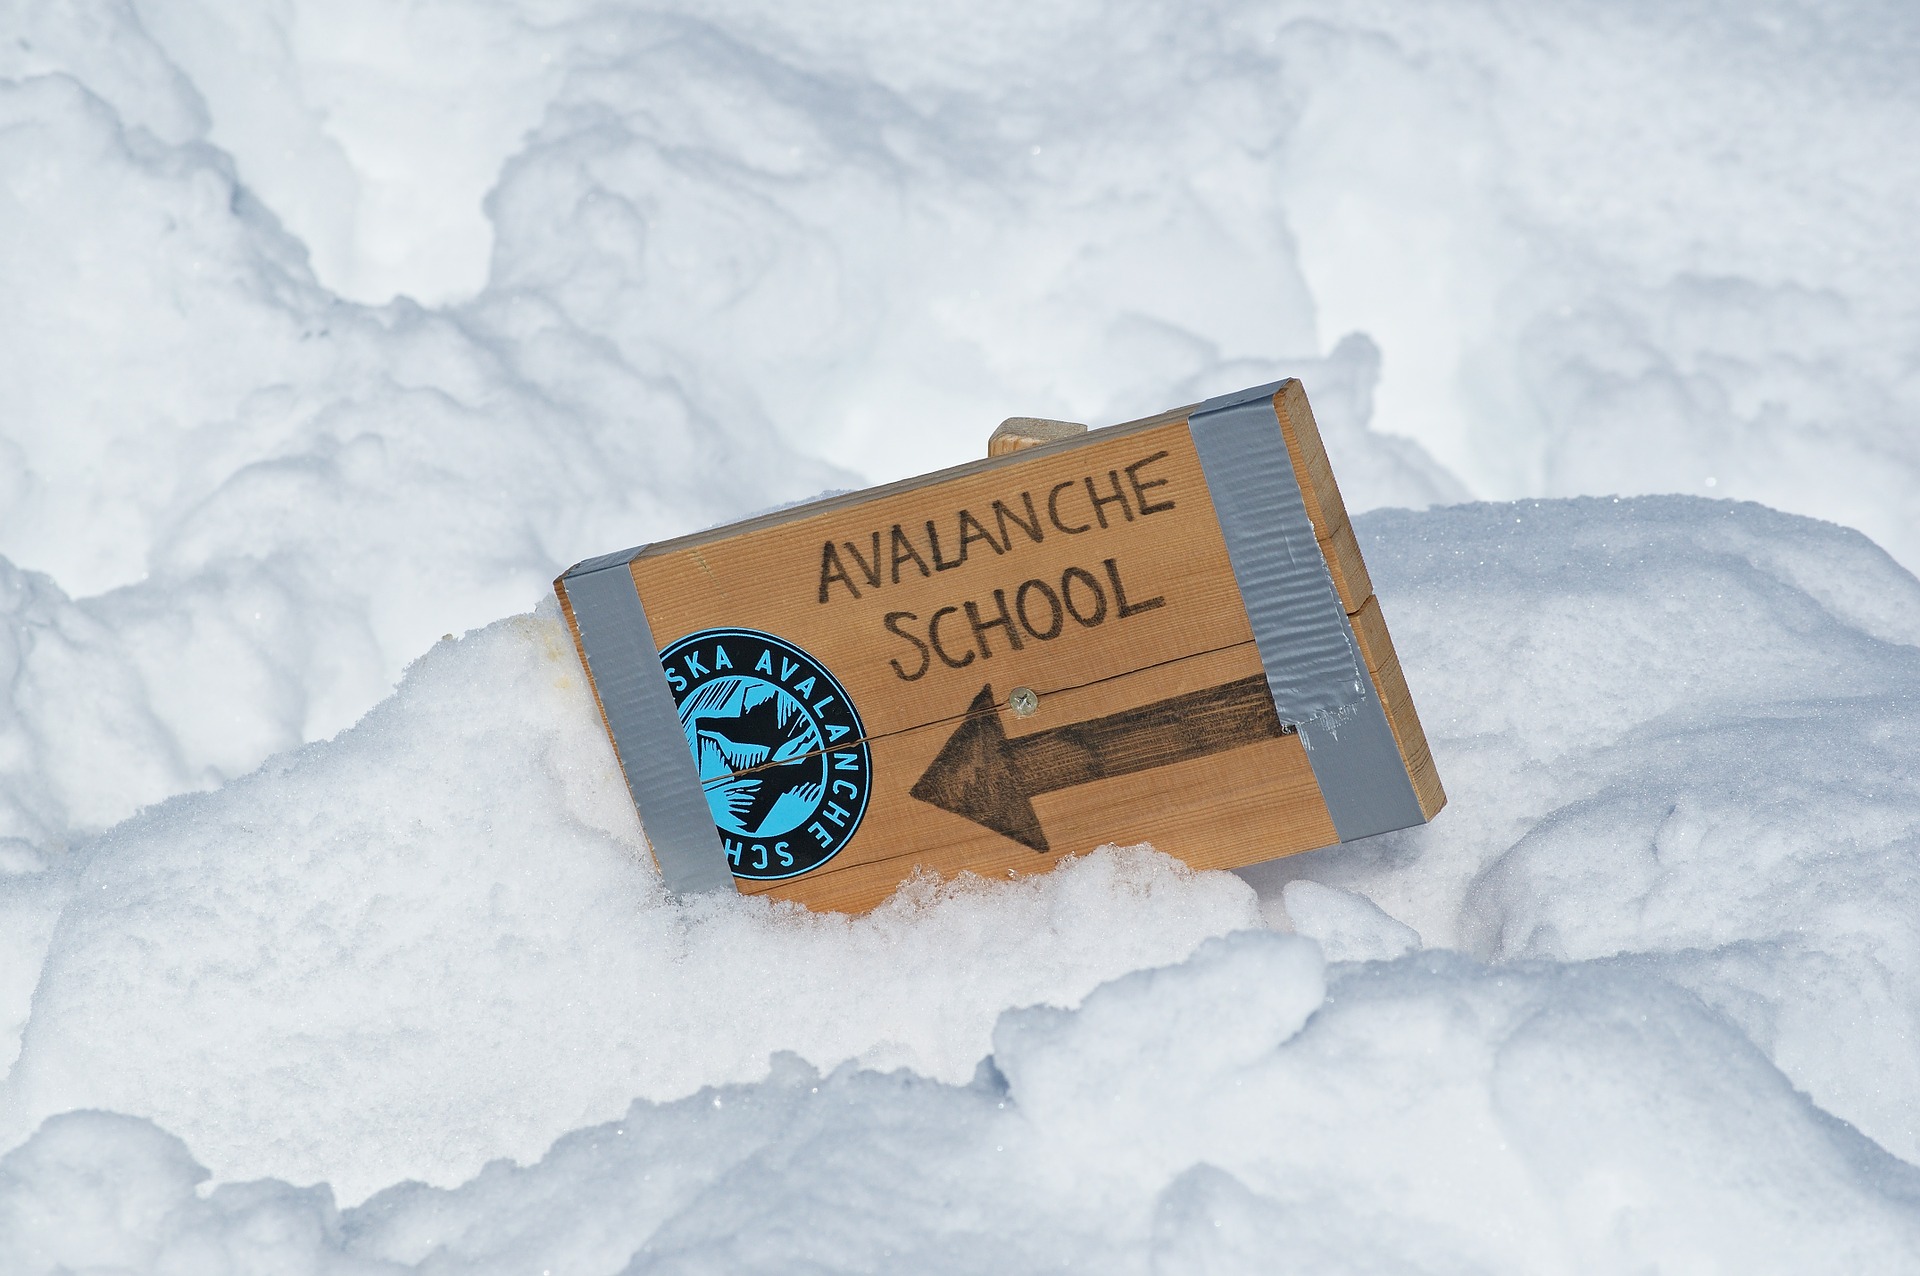 avalanche school sign in the snow